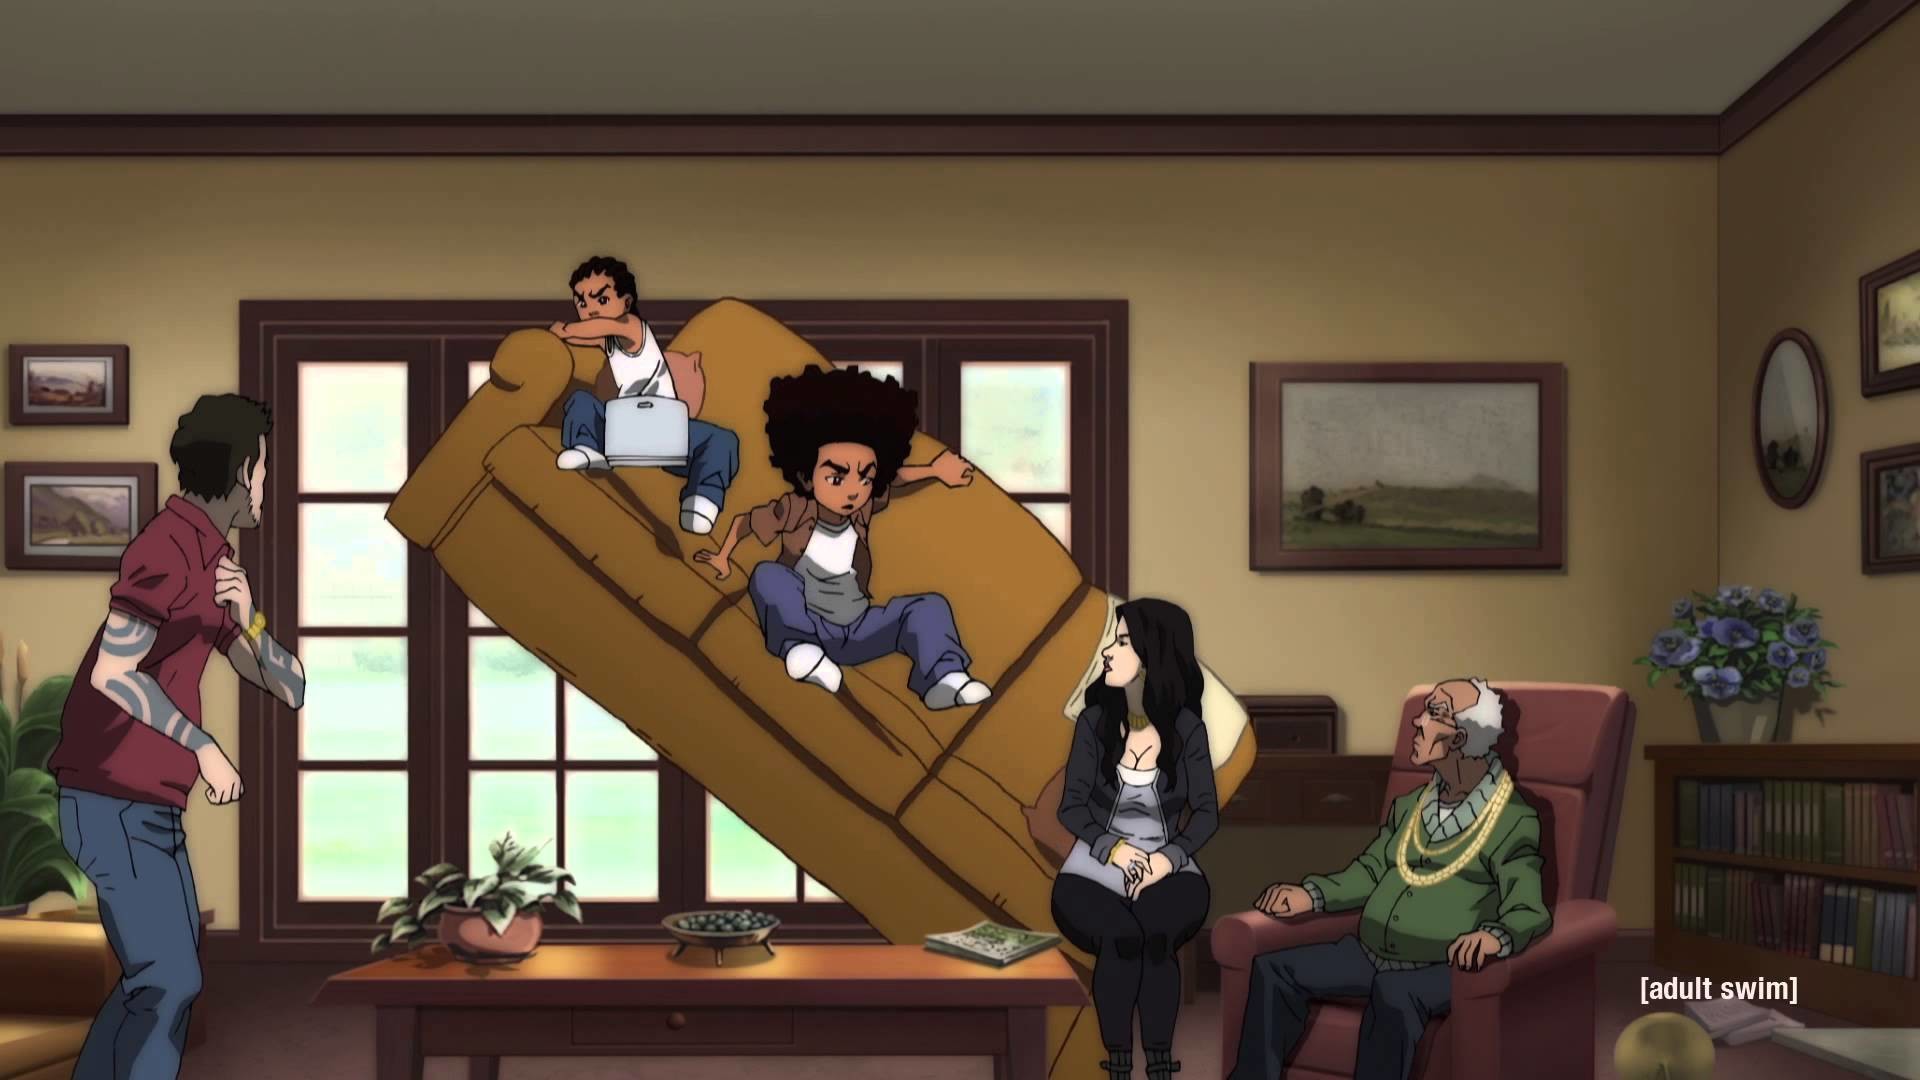 1920x1080 the boondocks wallpaper. I dont think youre ready